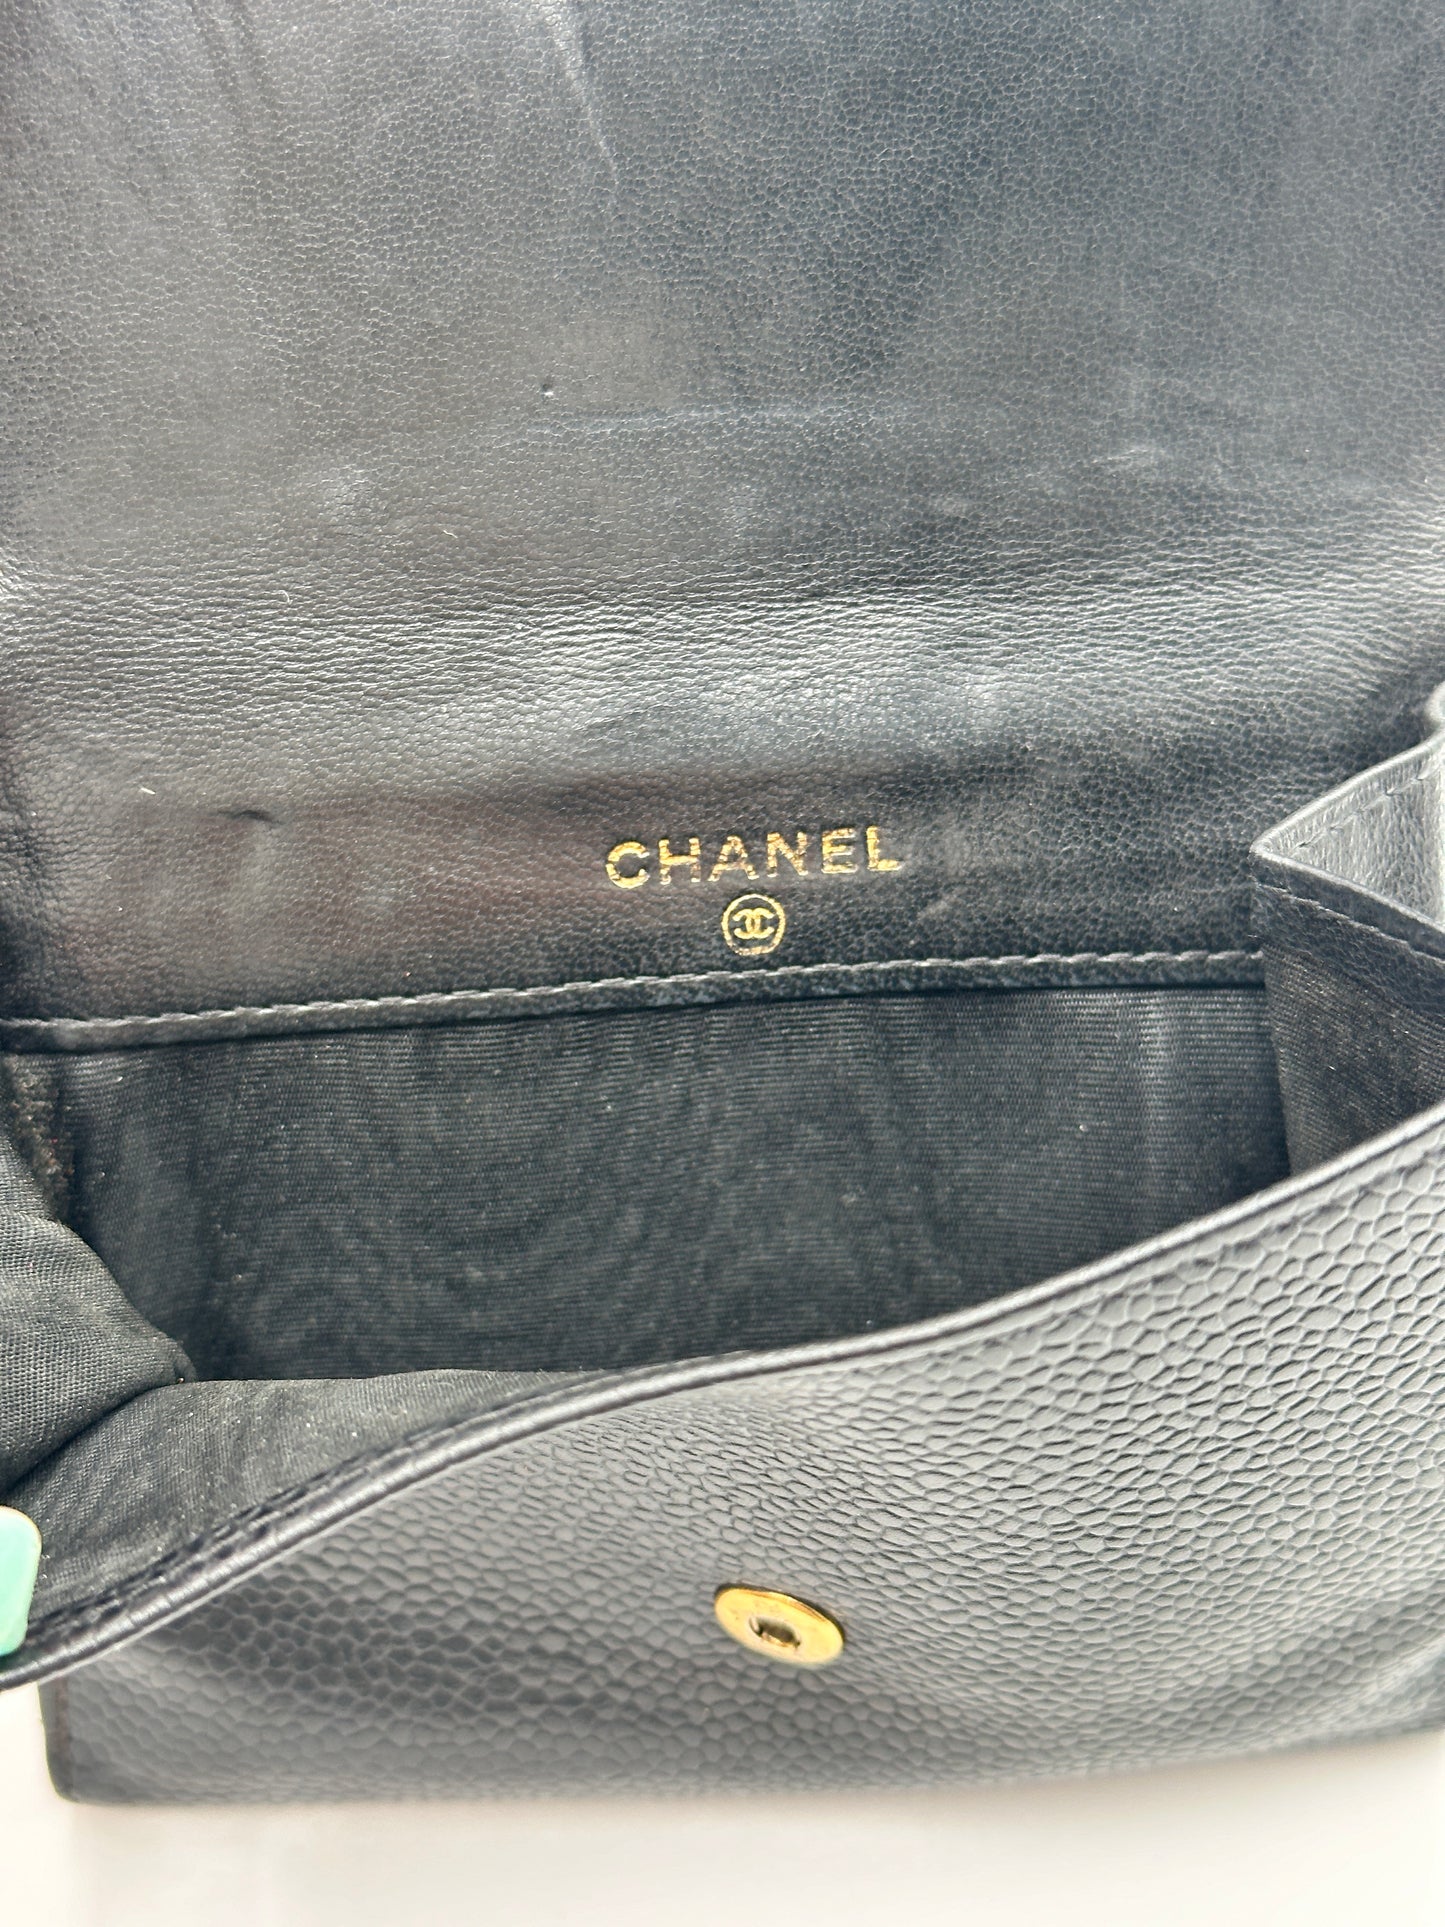 Authentic CHANEL CC Caviar Bifold Compact wallet